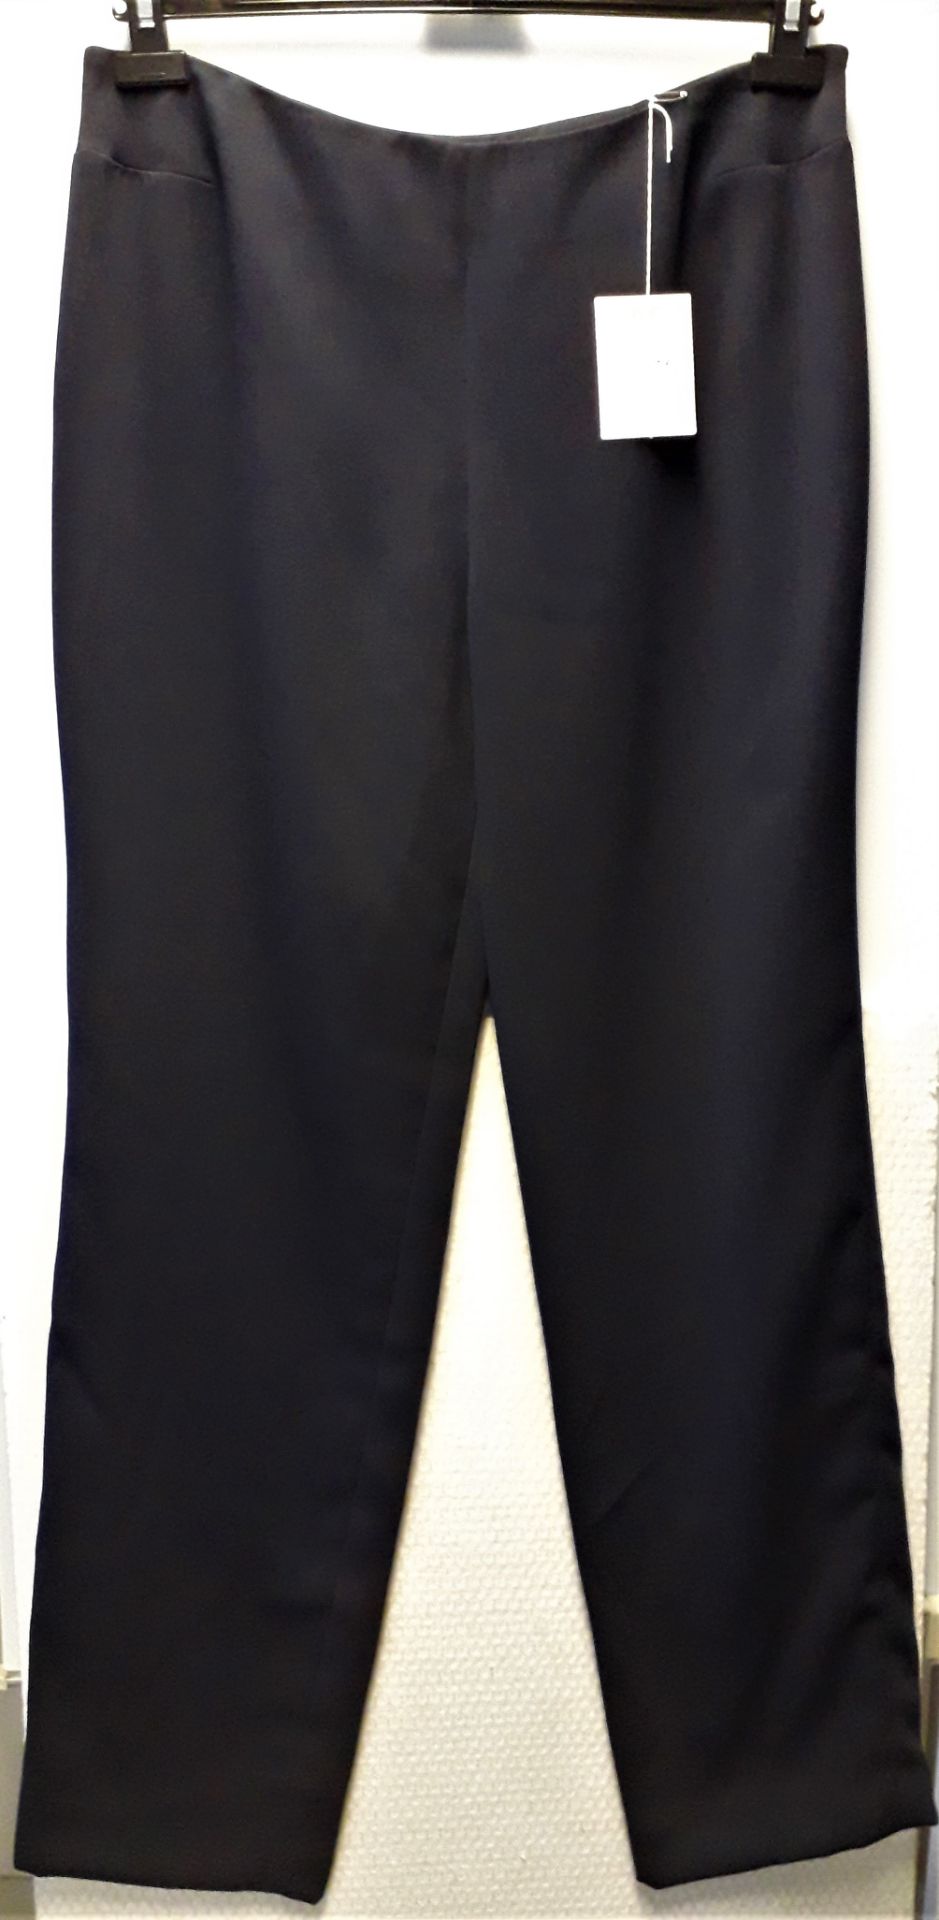 1 x Natan Plus Navy Trousers - Size: 46 - Material: 100% Polyester - From a High End Clothing